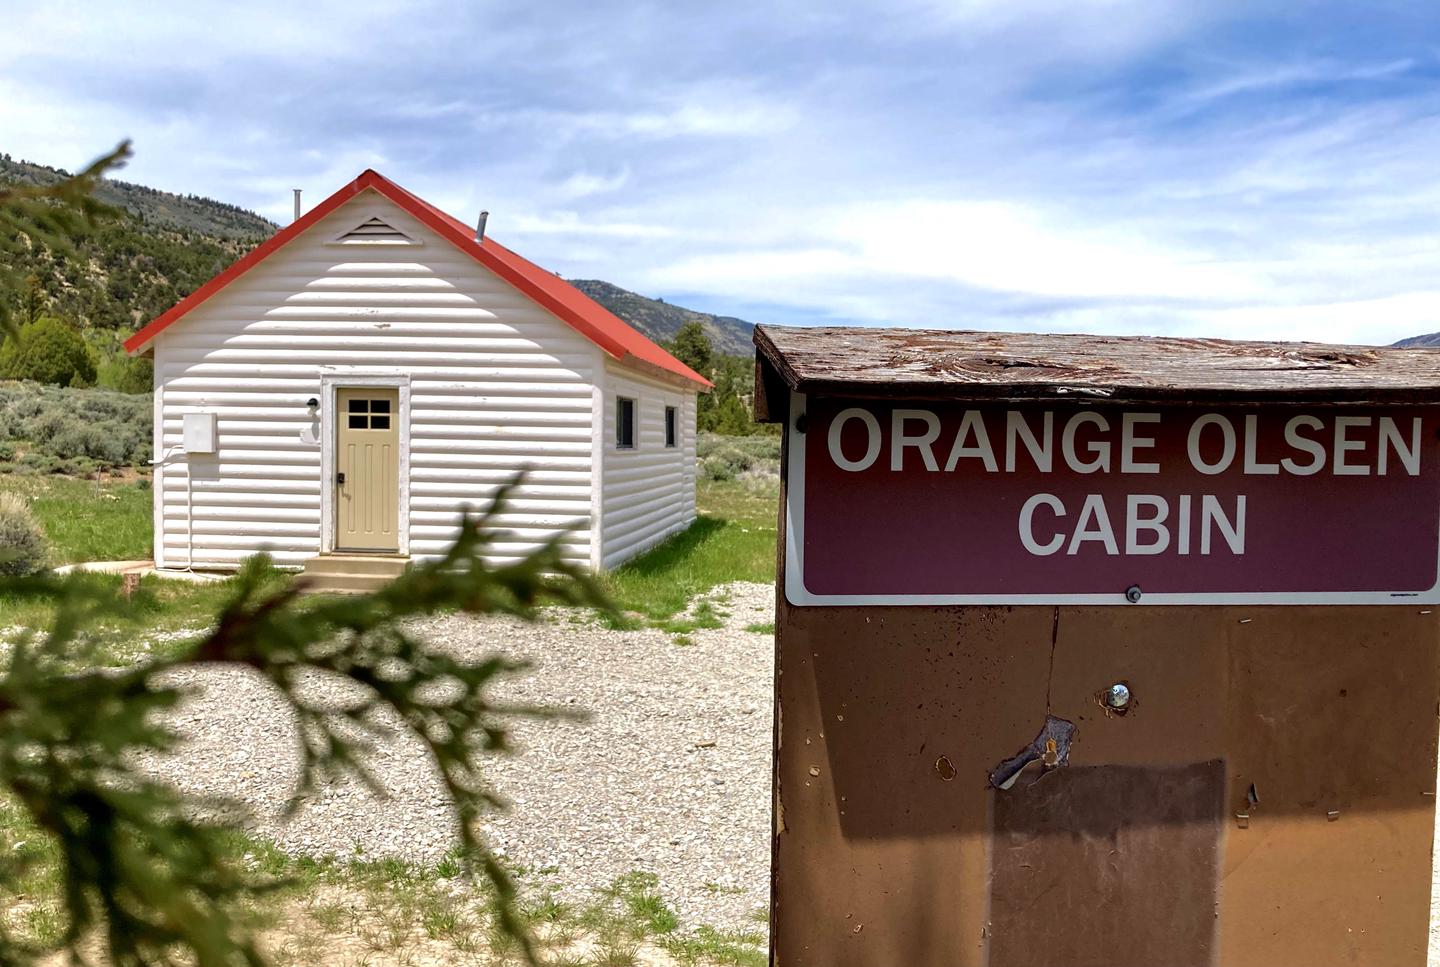 An Orange Olsen Cabin sign marks the structure.An Orange Olsen Cabin sign marks the structure in Joes Valley.